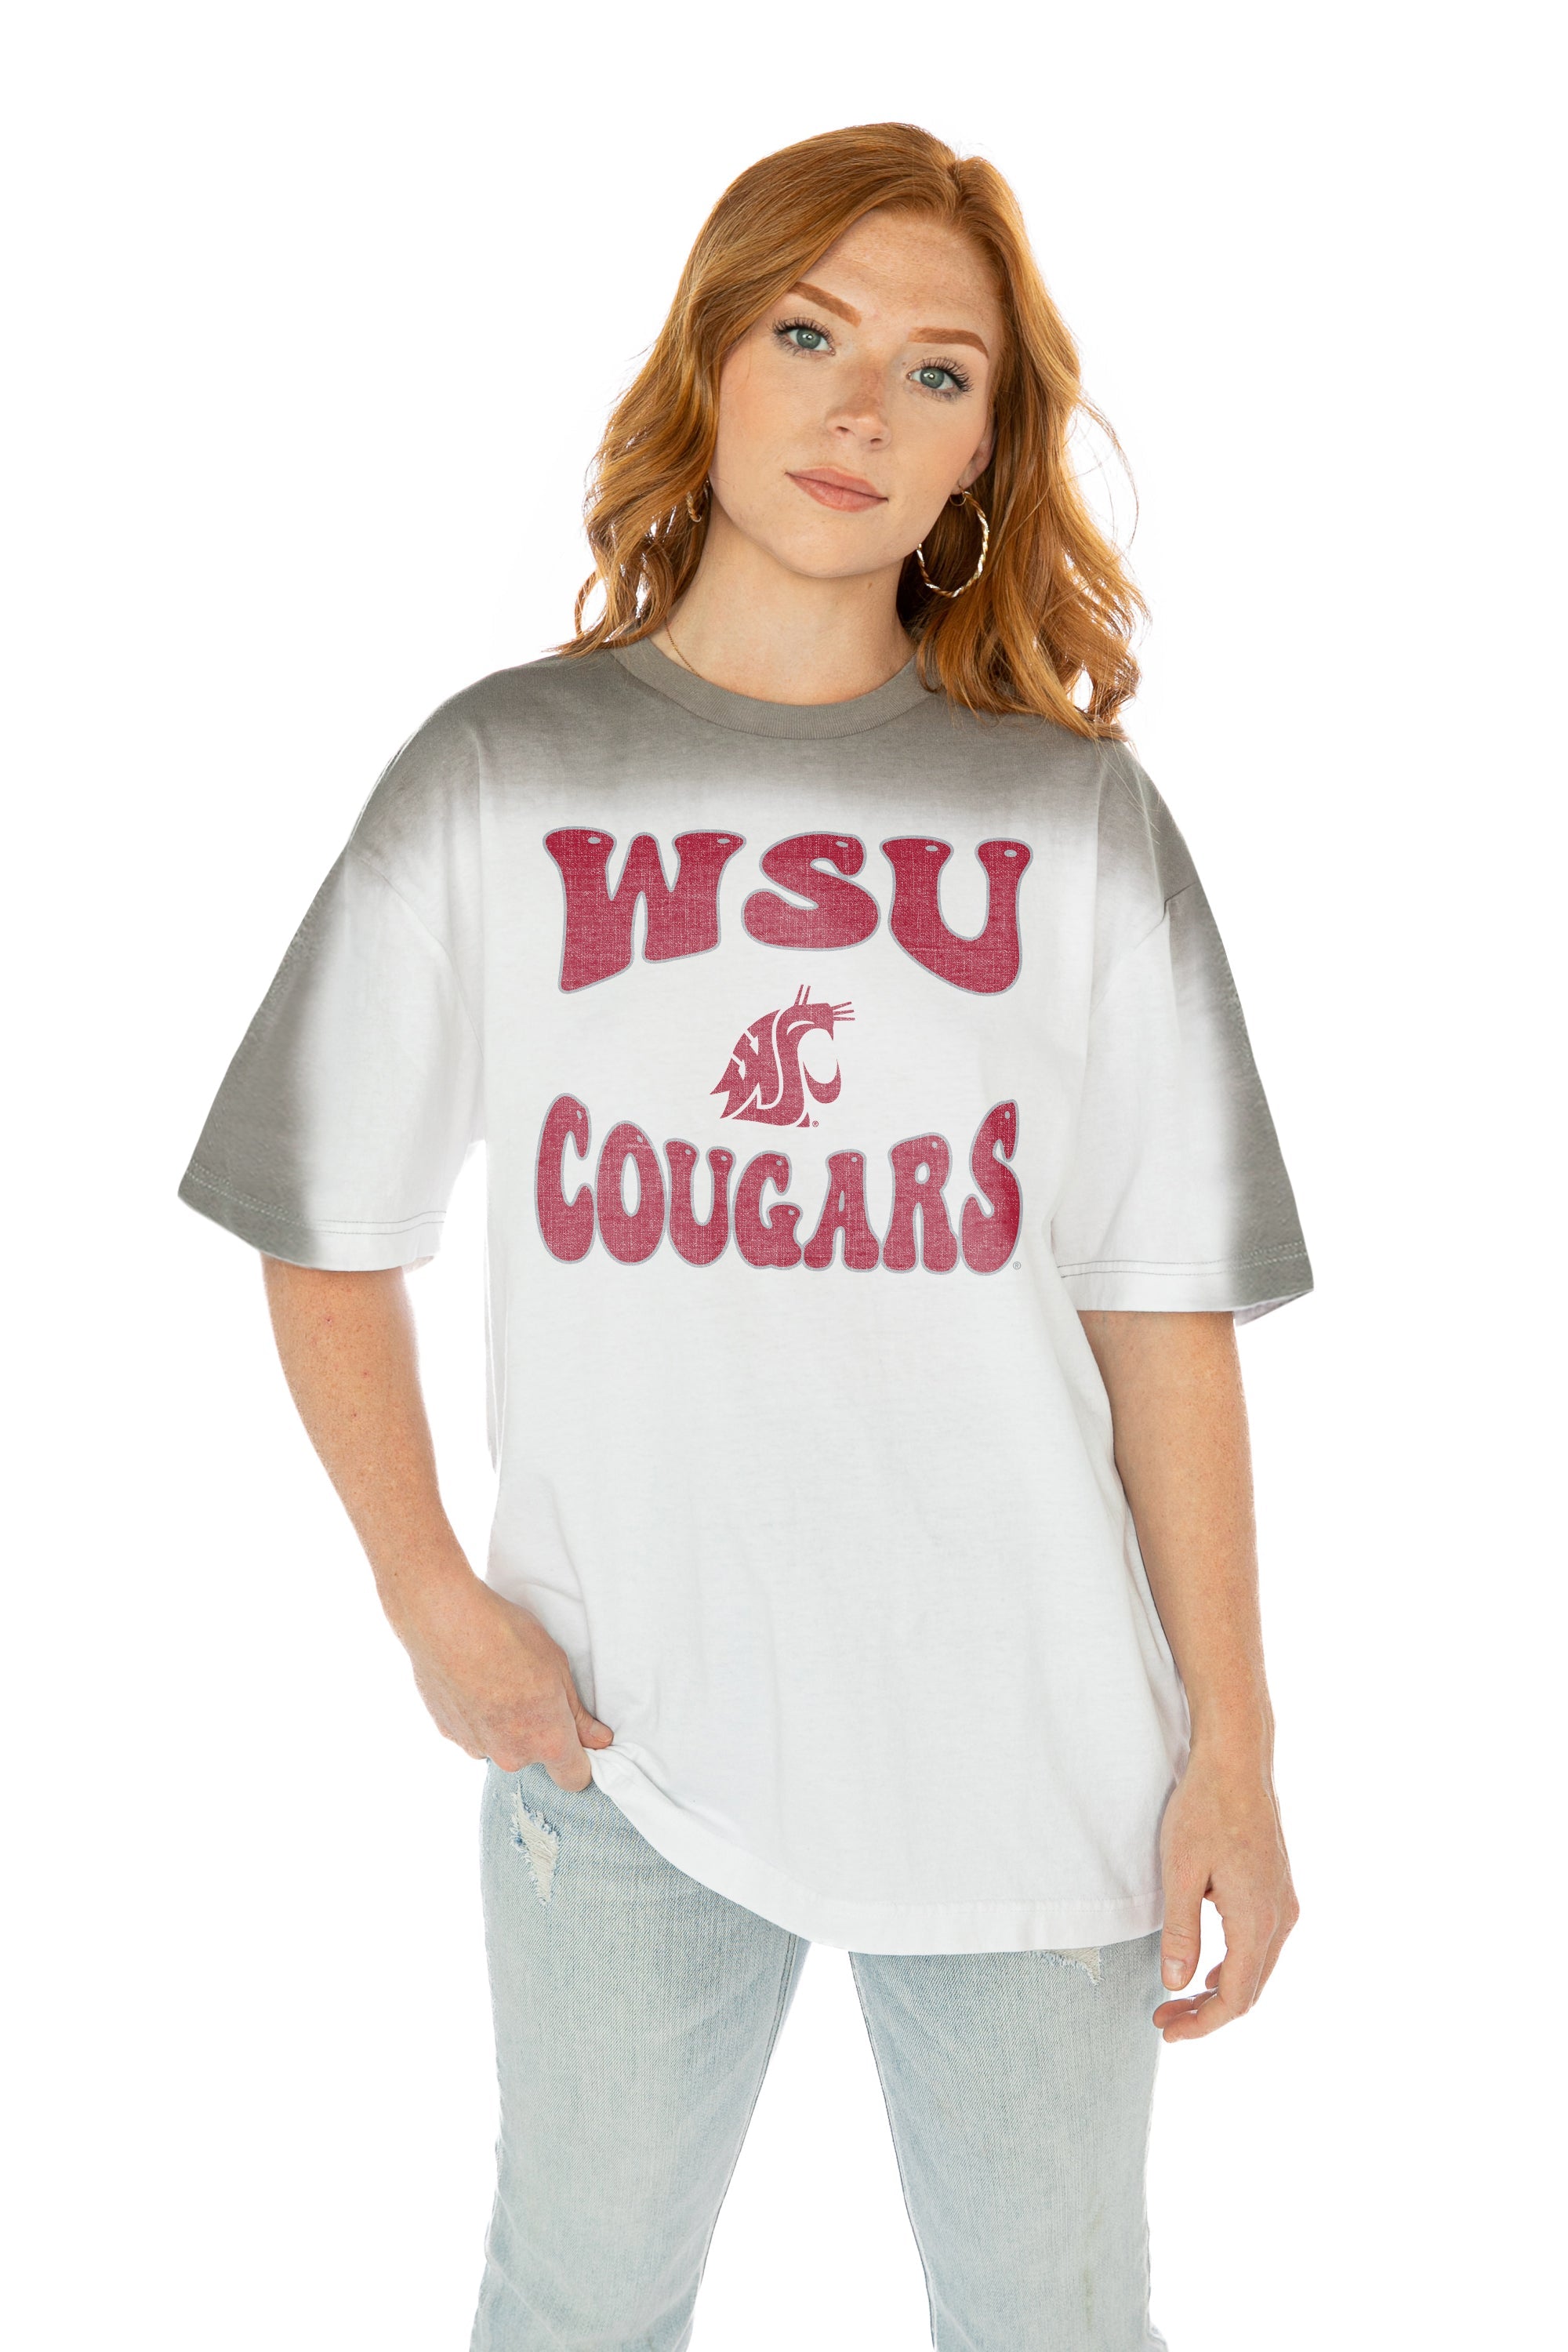 Cougars football Hall of Fame jersey